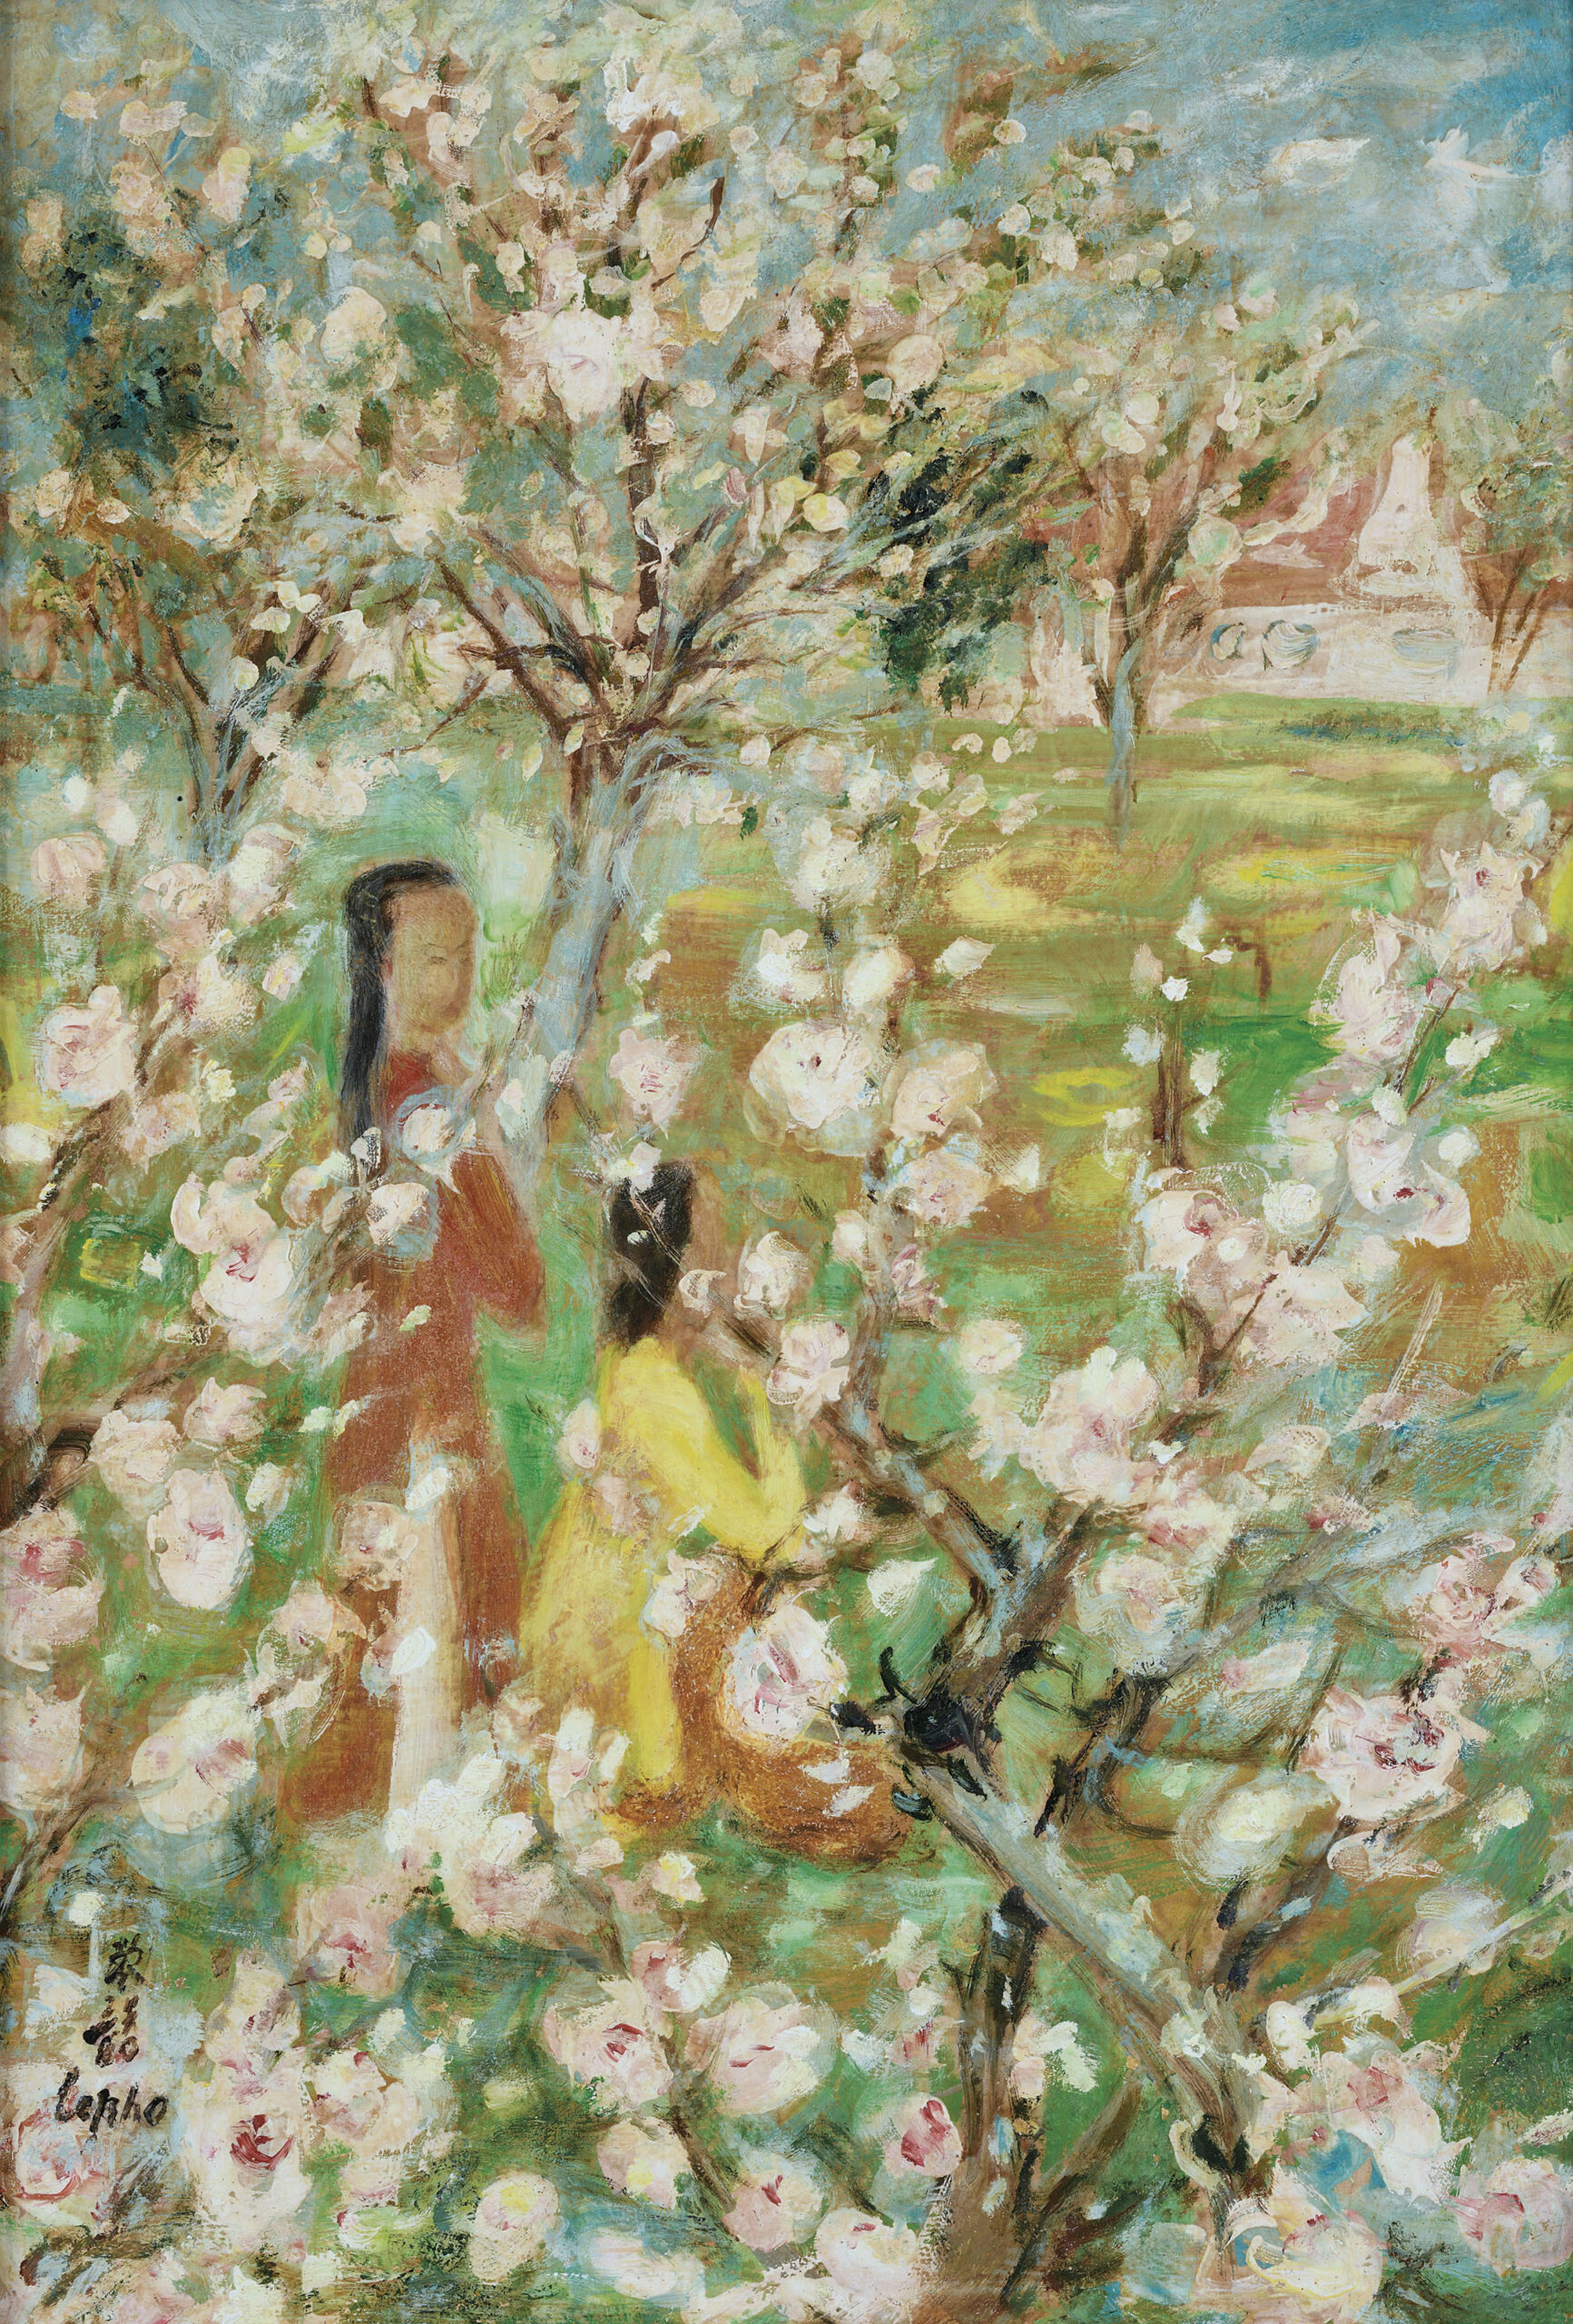 LE PHO (1907-2001)
Le Printemps (Spring)
signed in Chinese and signed again ‘Le pho’ (lower left)
mixed media on silk laid on board
72.5 x 49.5 cm. (28 1/2 x 19 1/2 in.)
Painted circa 1955